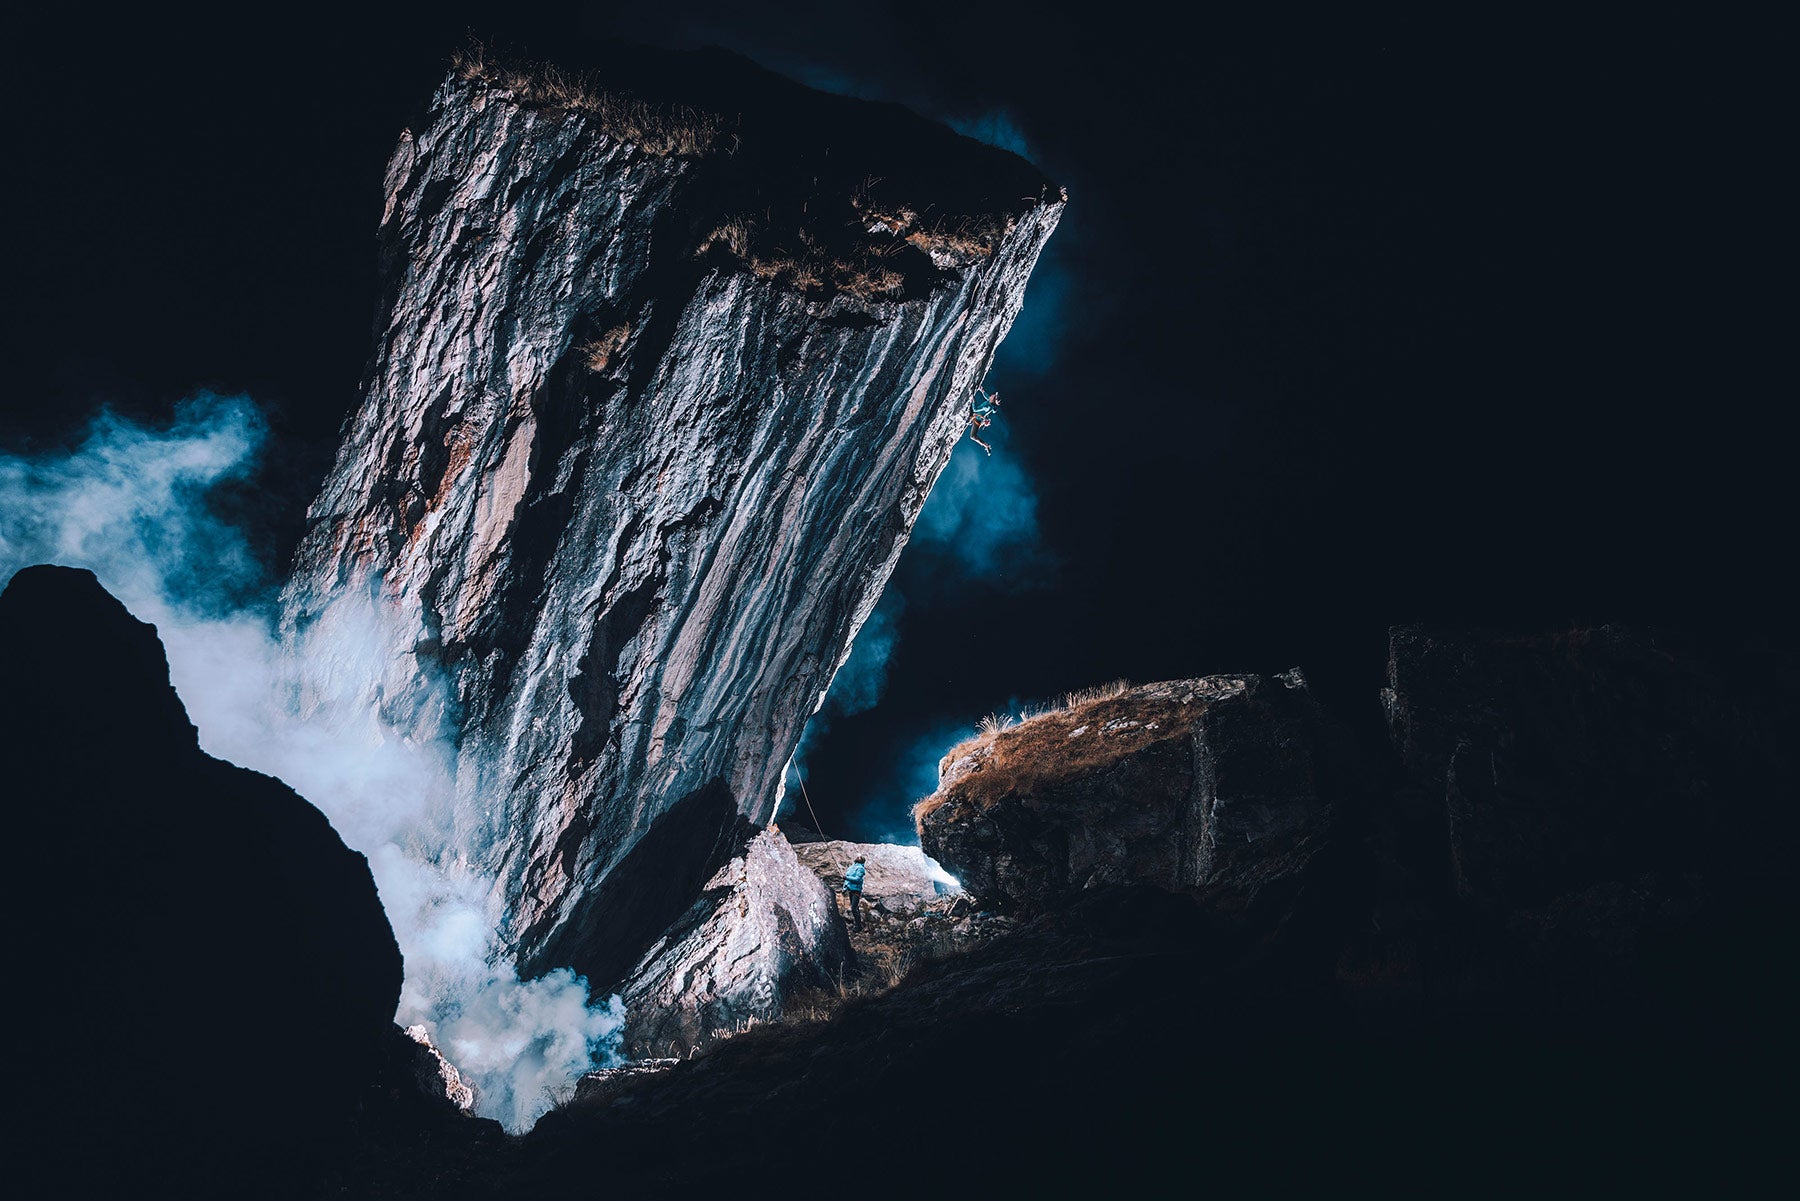 A climber scales a large monolith sticking out of the ground at night, with smoke shrouding the bottom. 